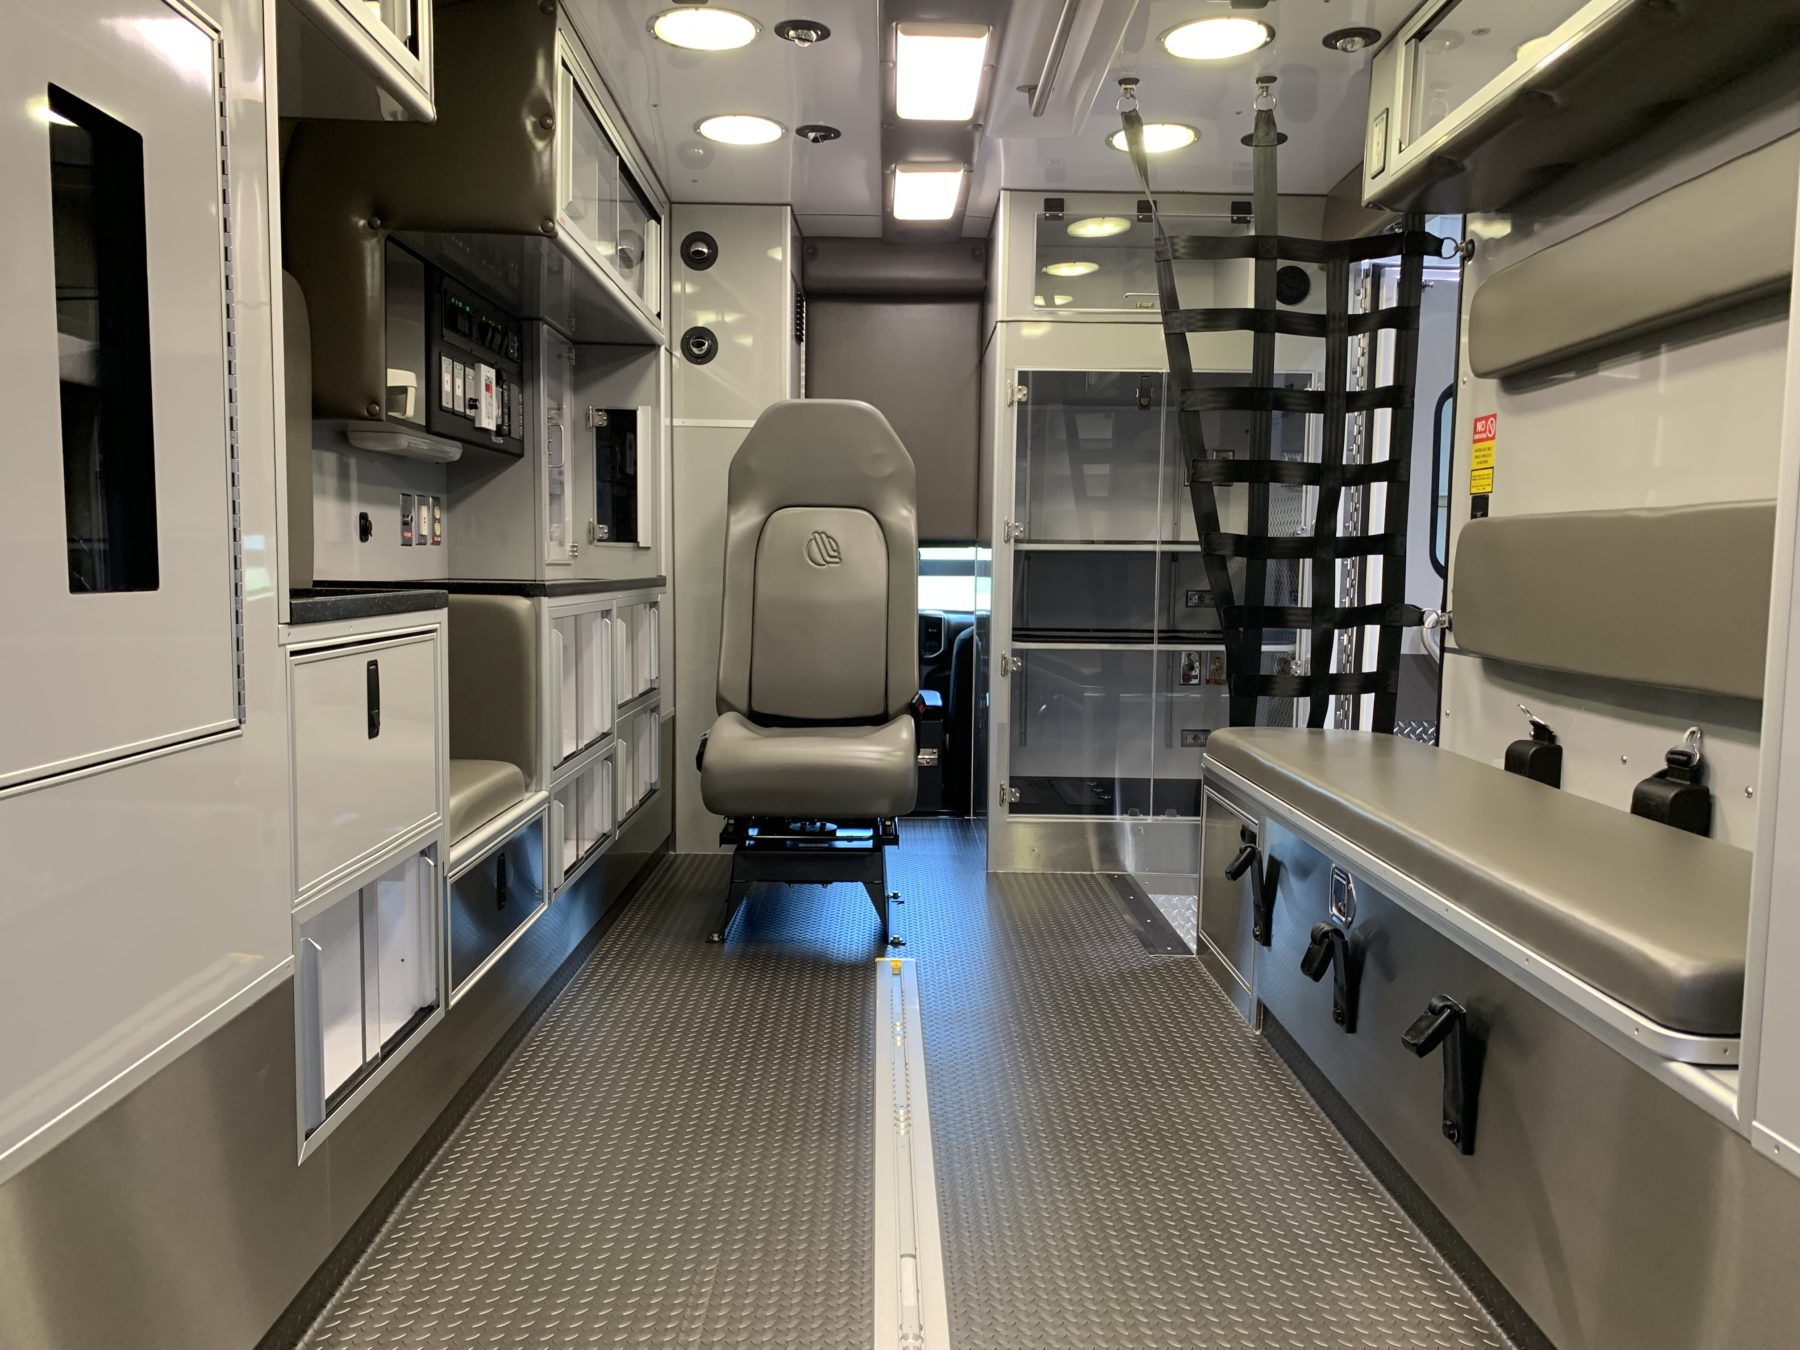 2022 Ram 4500 4x4 Heavy Duty Ambulance For Sale – Picture 3